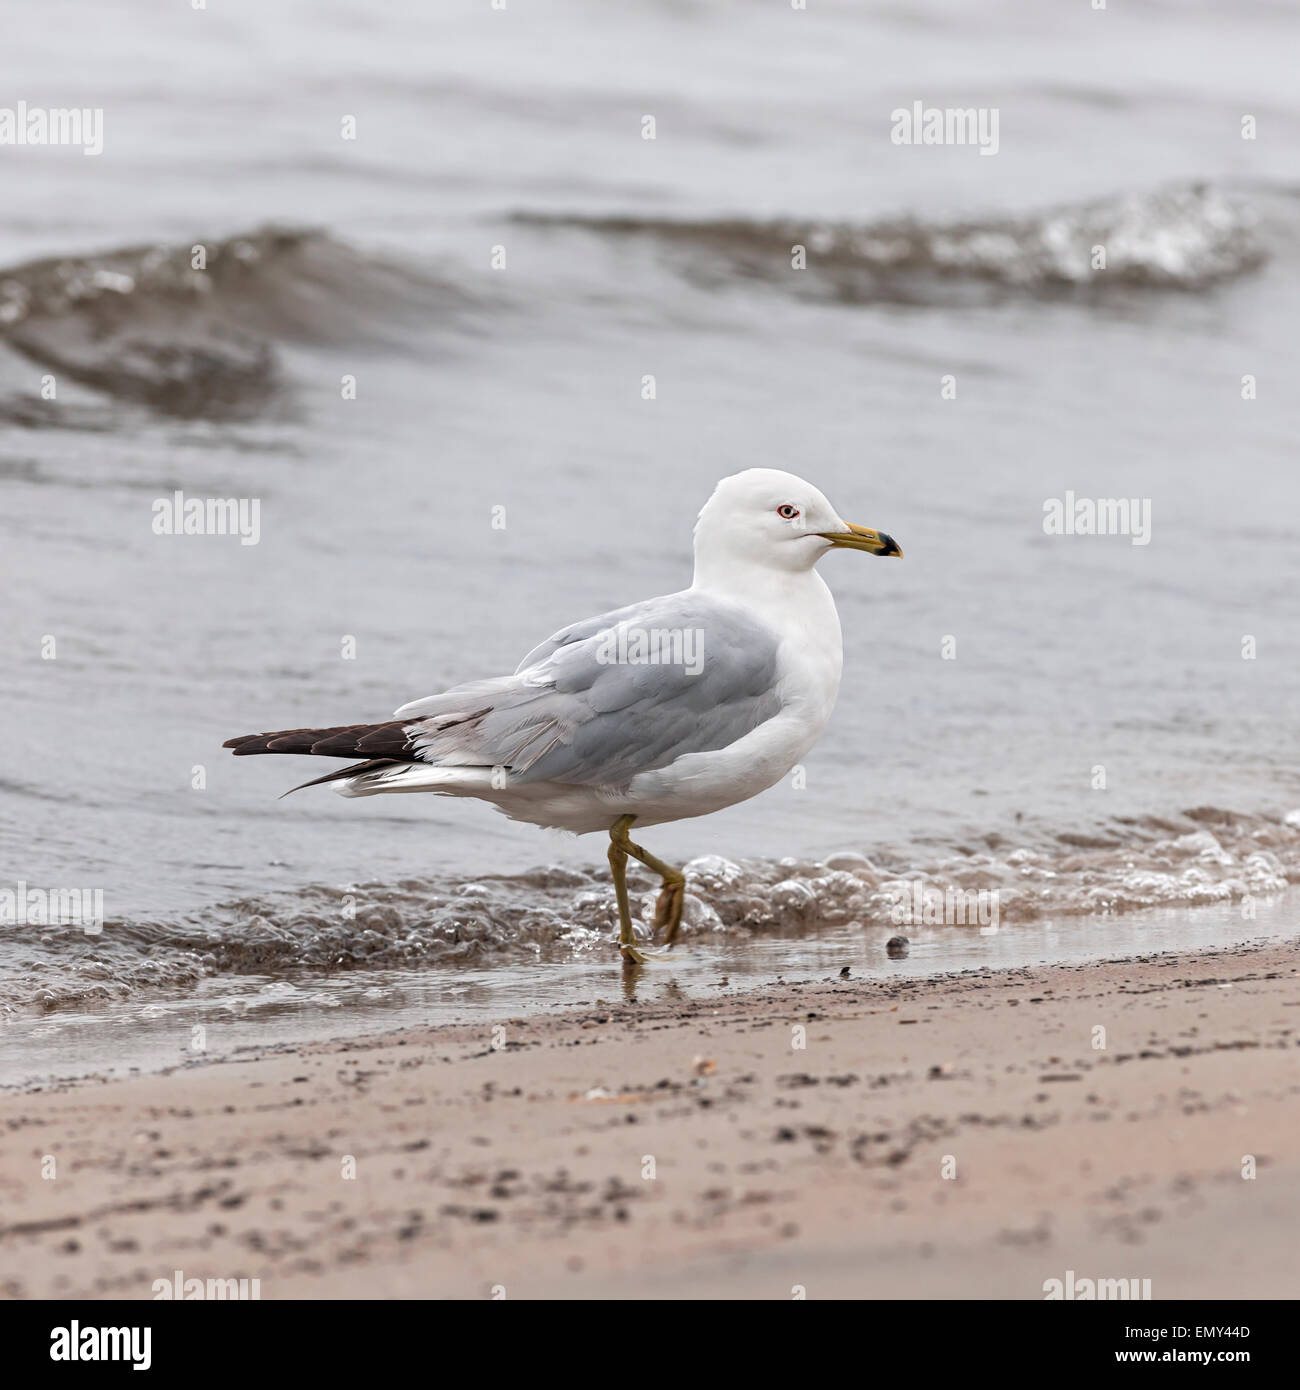 Seagull close up standing on sandy foggy beach near water, square format Stock Photo